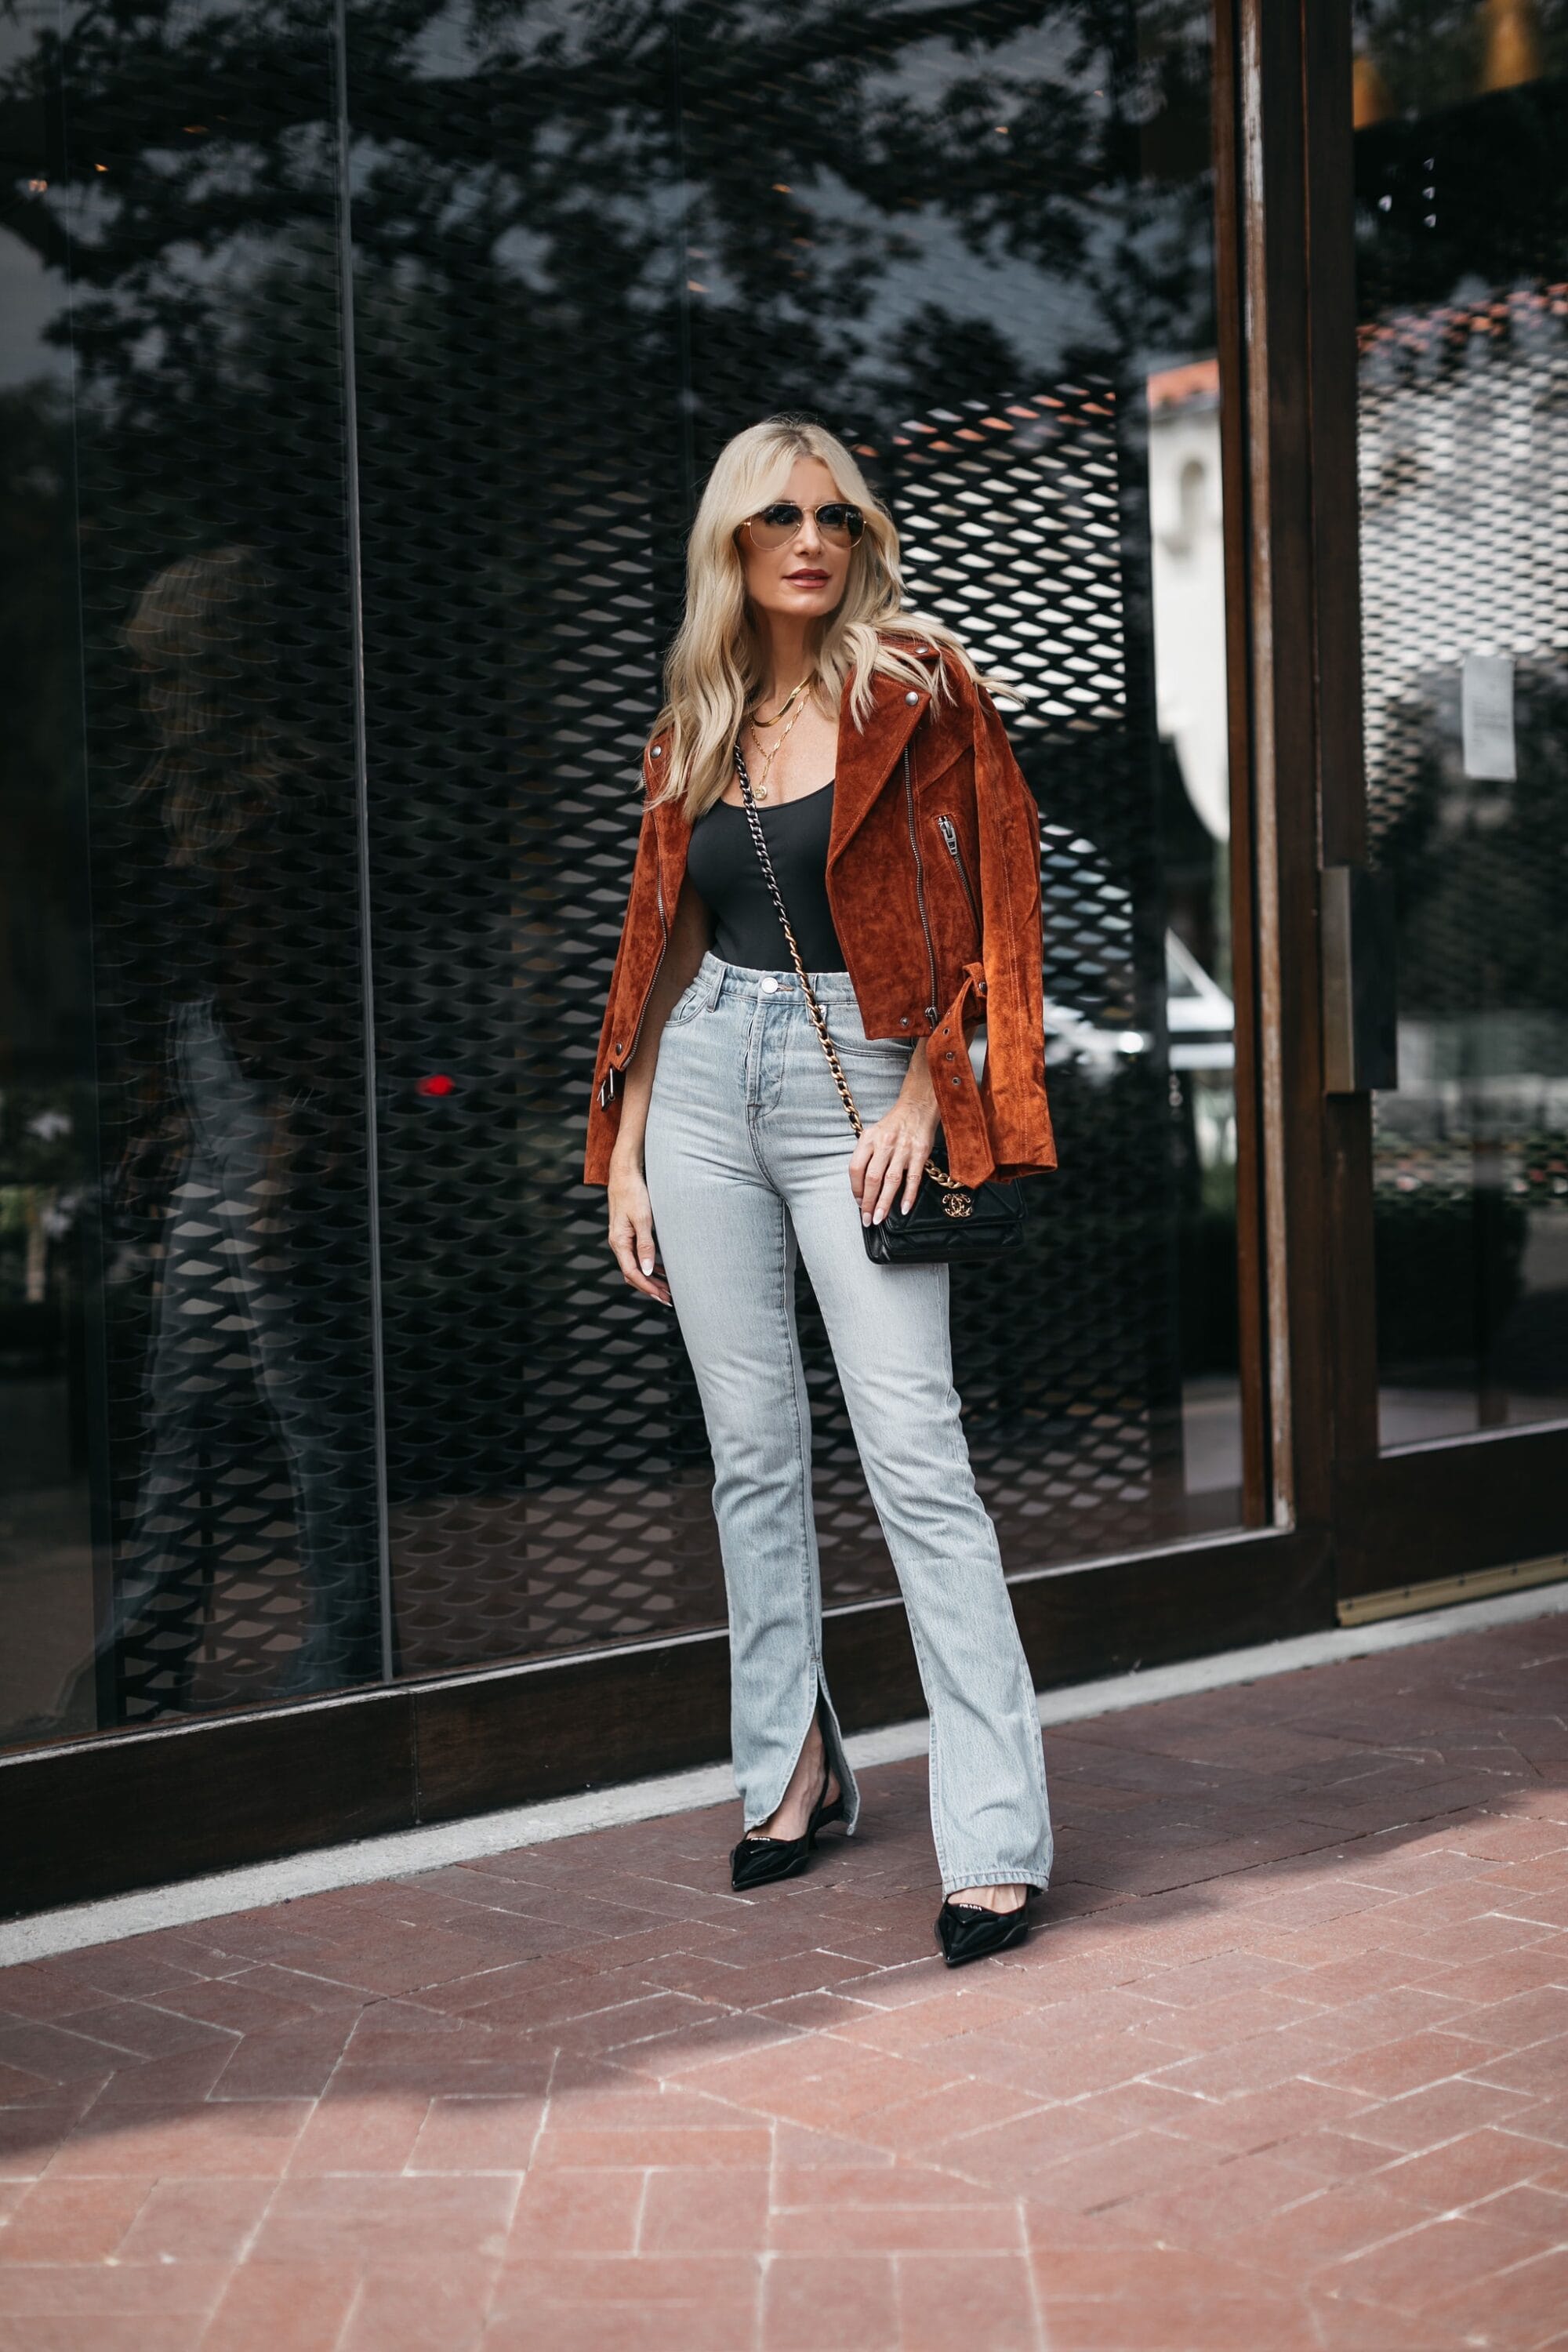 Dallas fashion blogger over 40 wearing BLANKNYC Moto jacket as part of Nordstrom Anniversary Sale